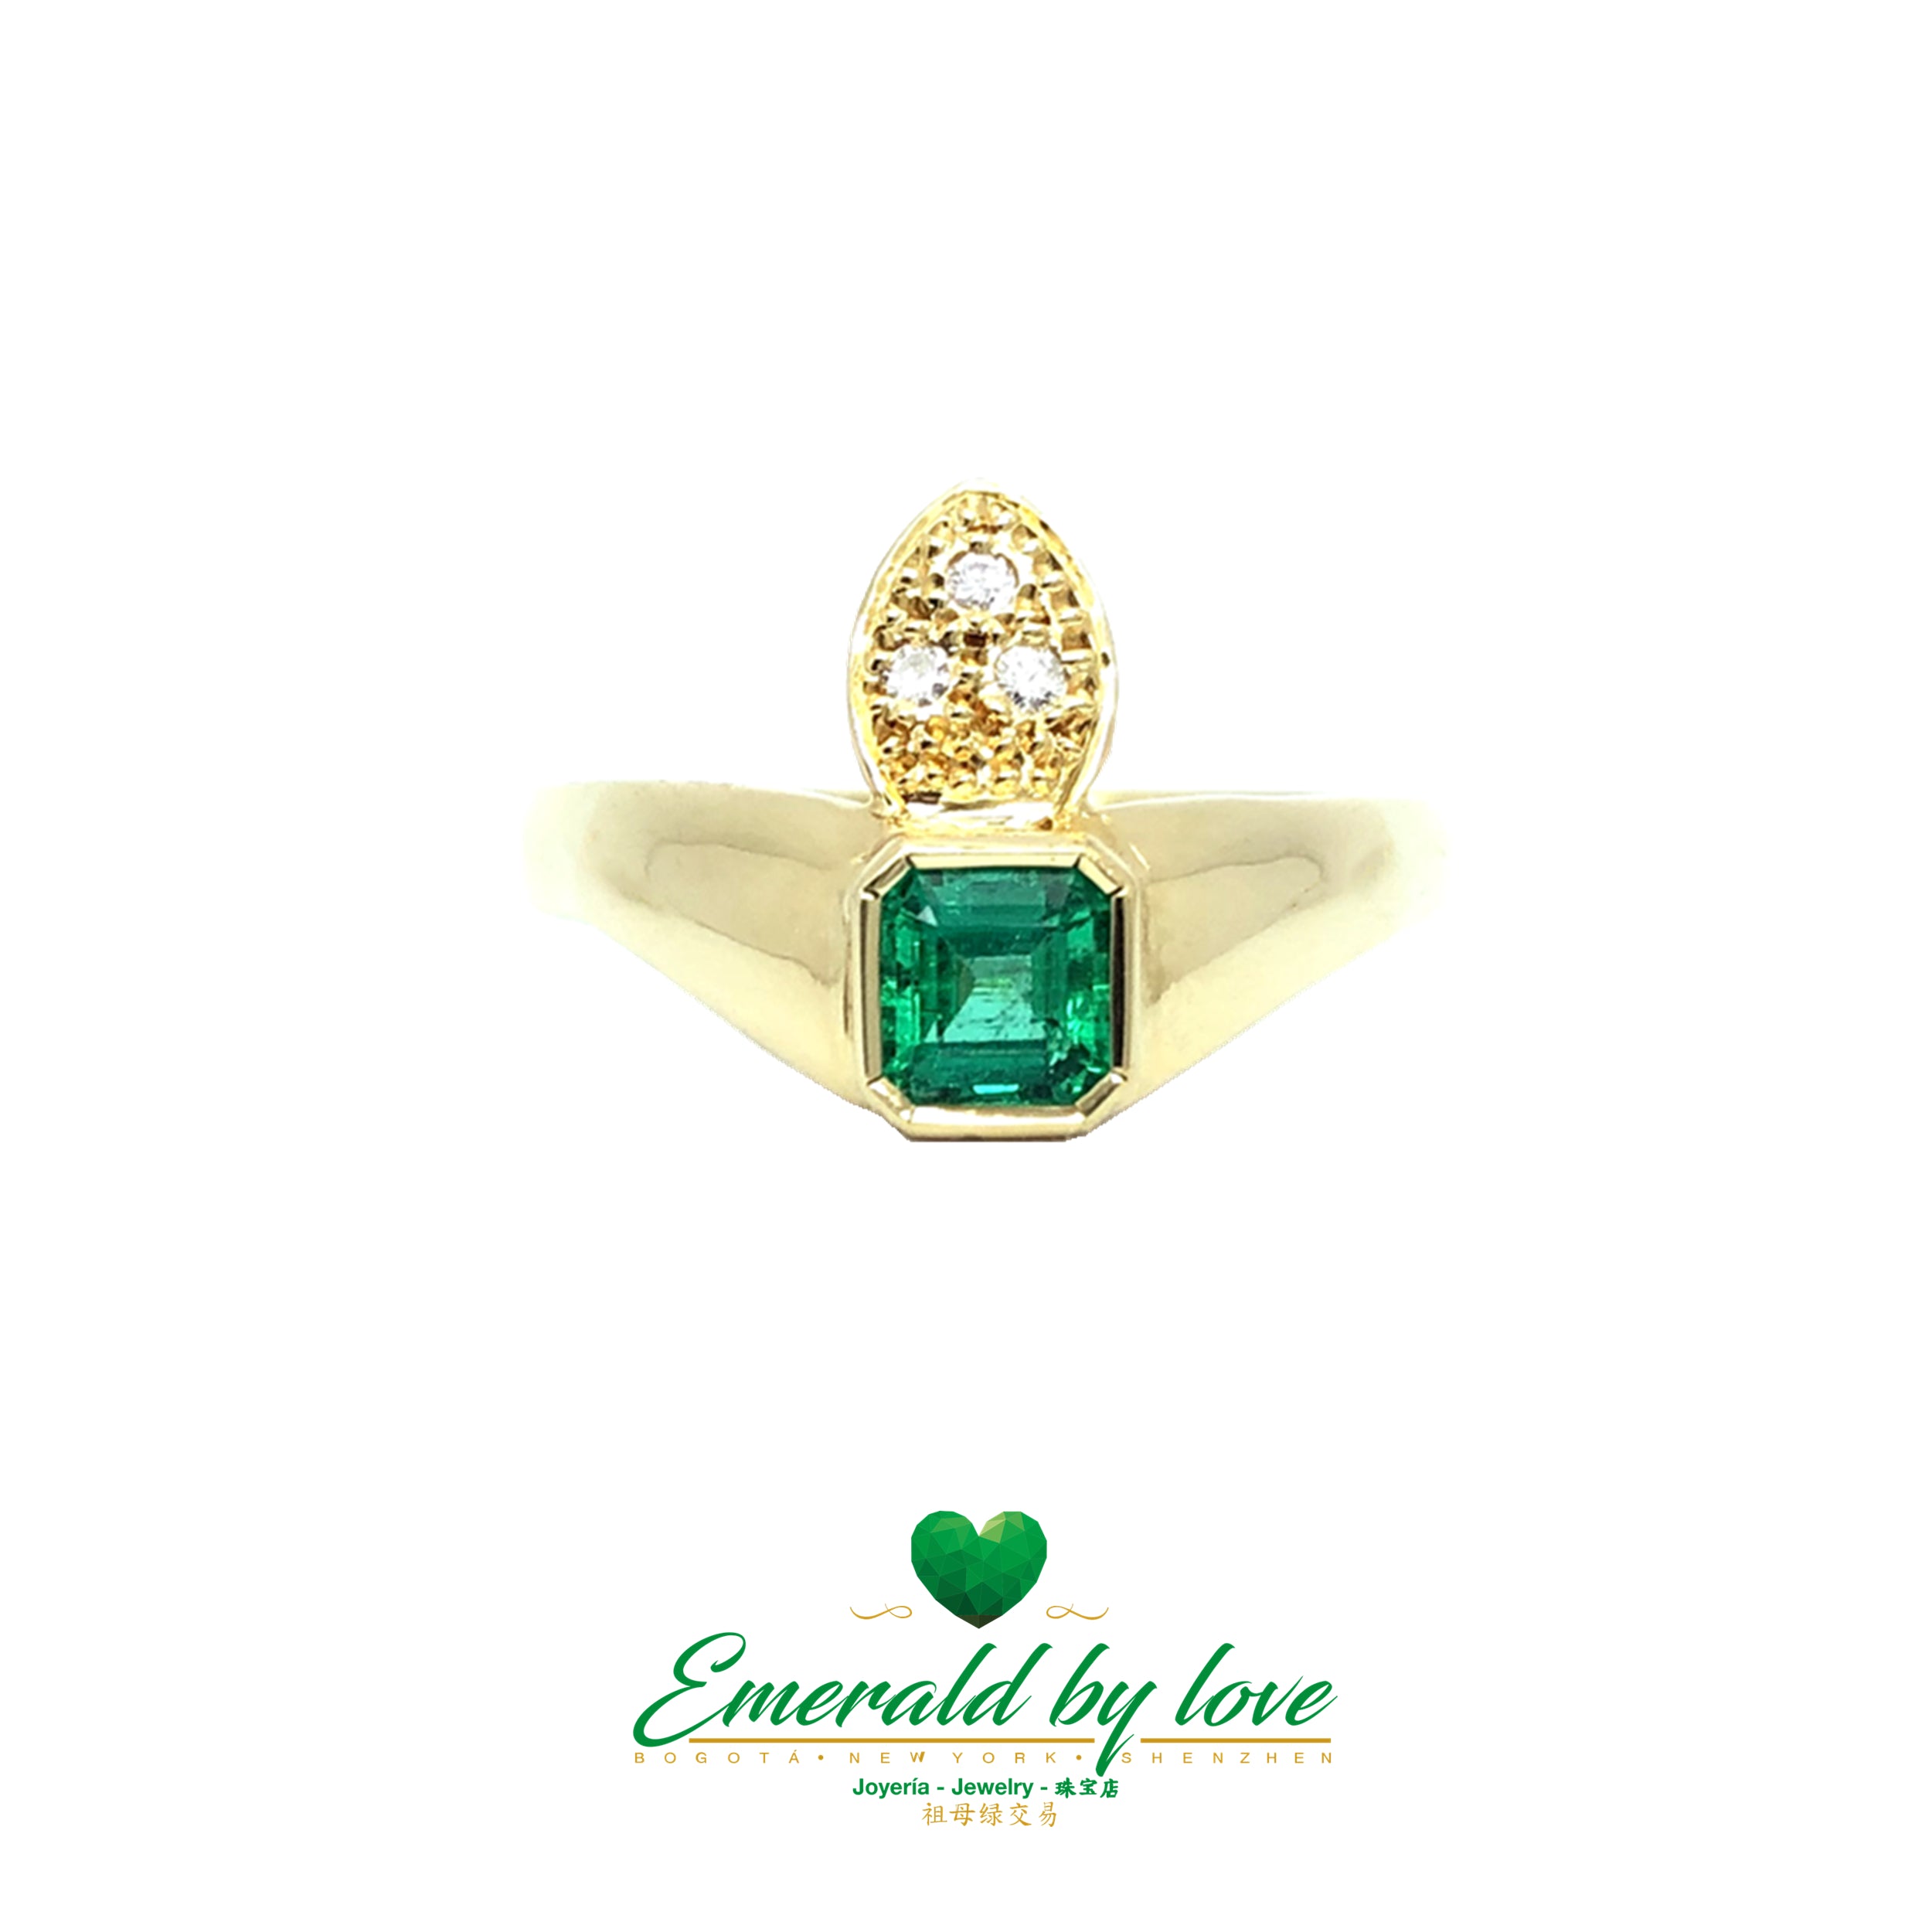 Amazing Colombian Emerald Ring in 18k yellow gold